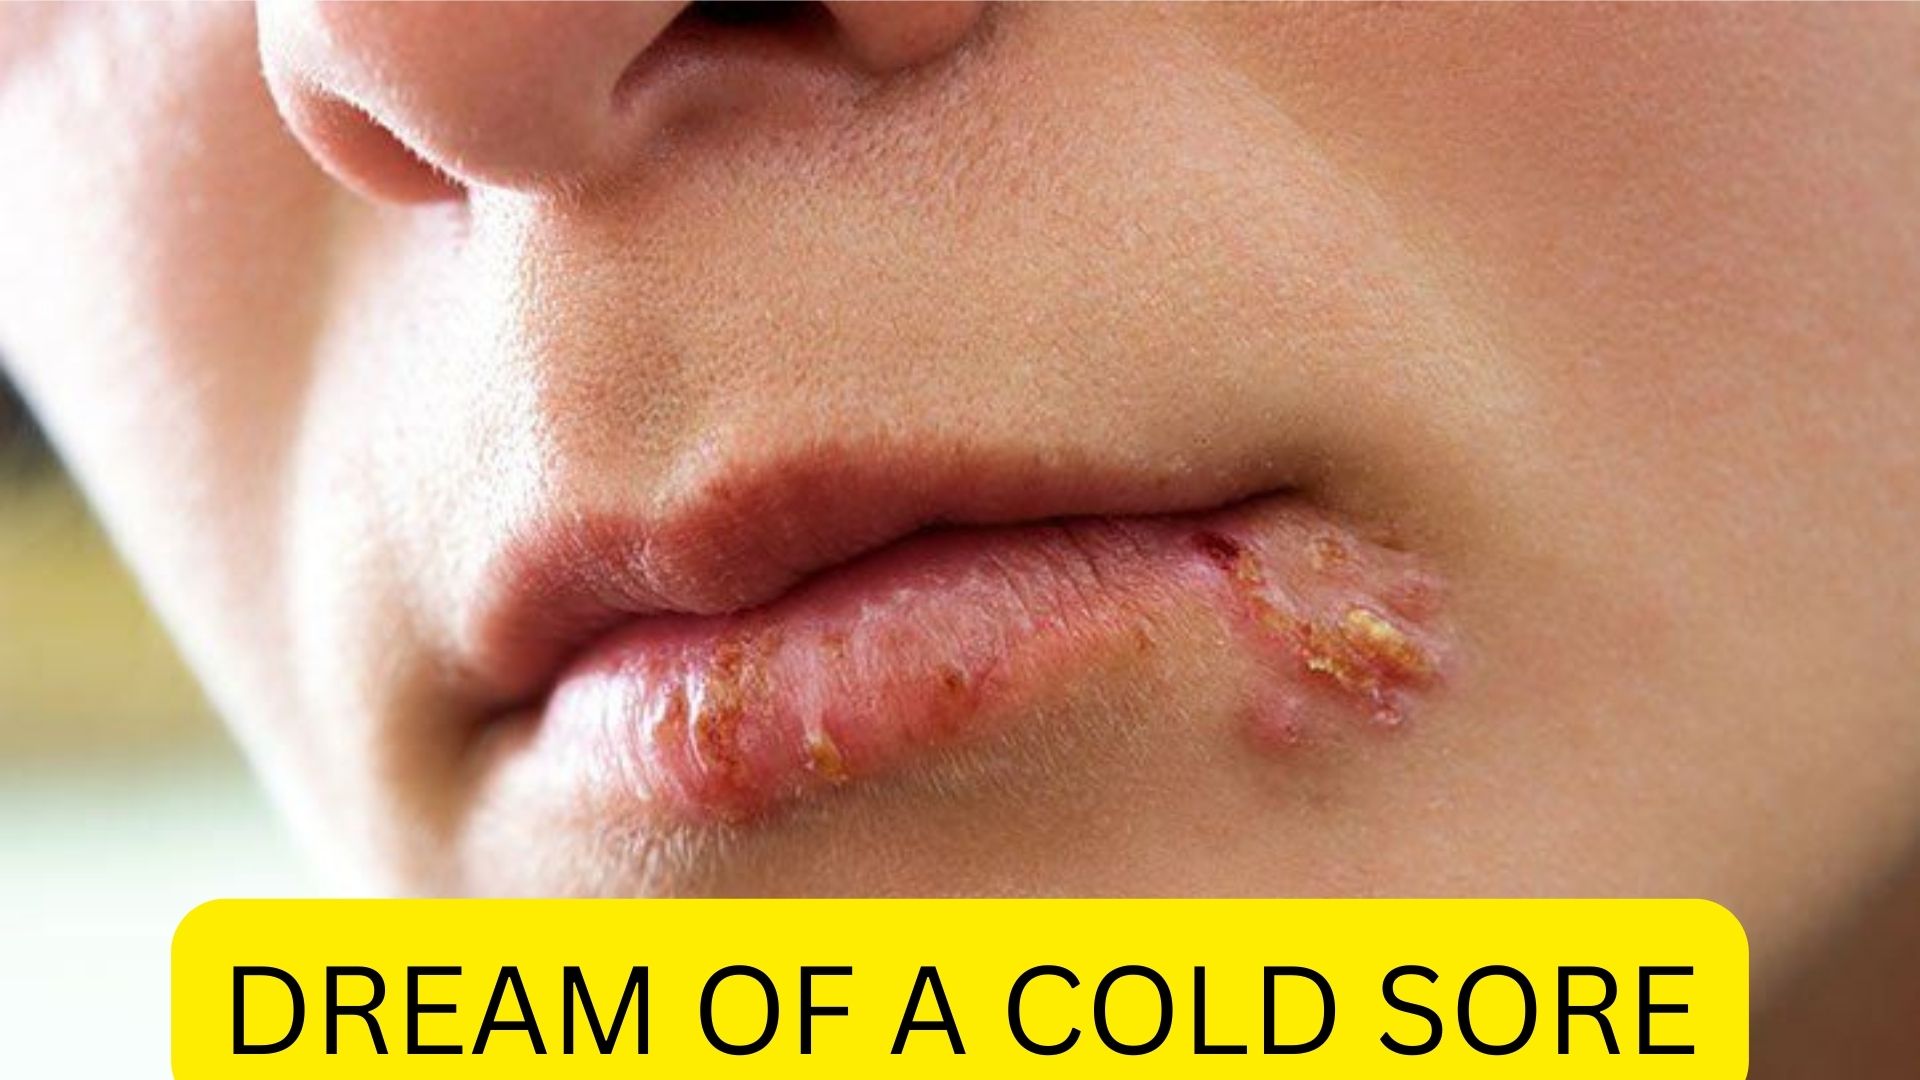 Dream Of A Cold Sore - Means Your Determination And Drive Toward Your Goals